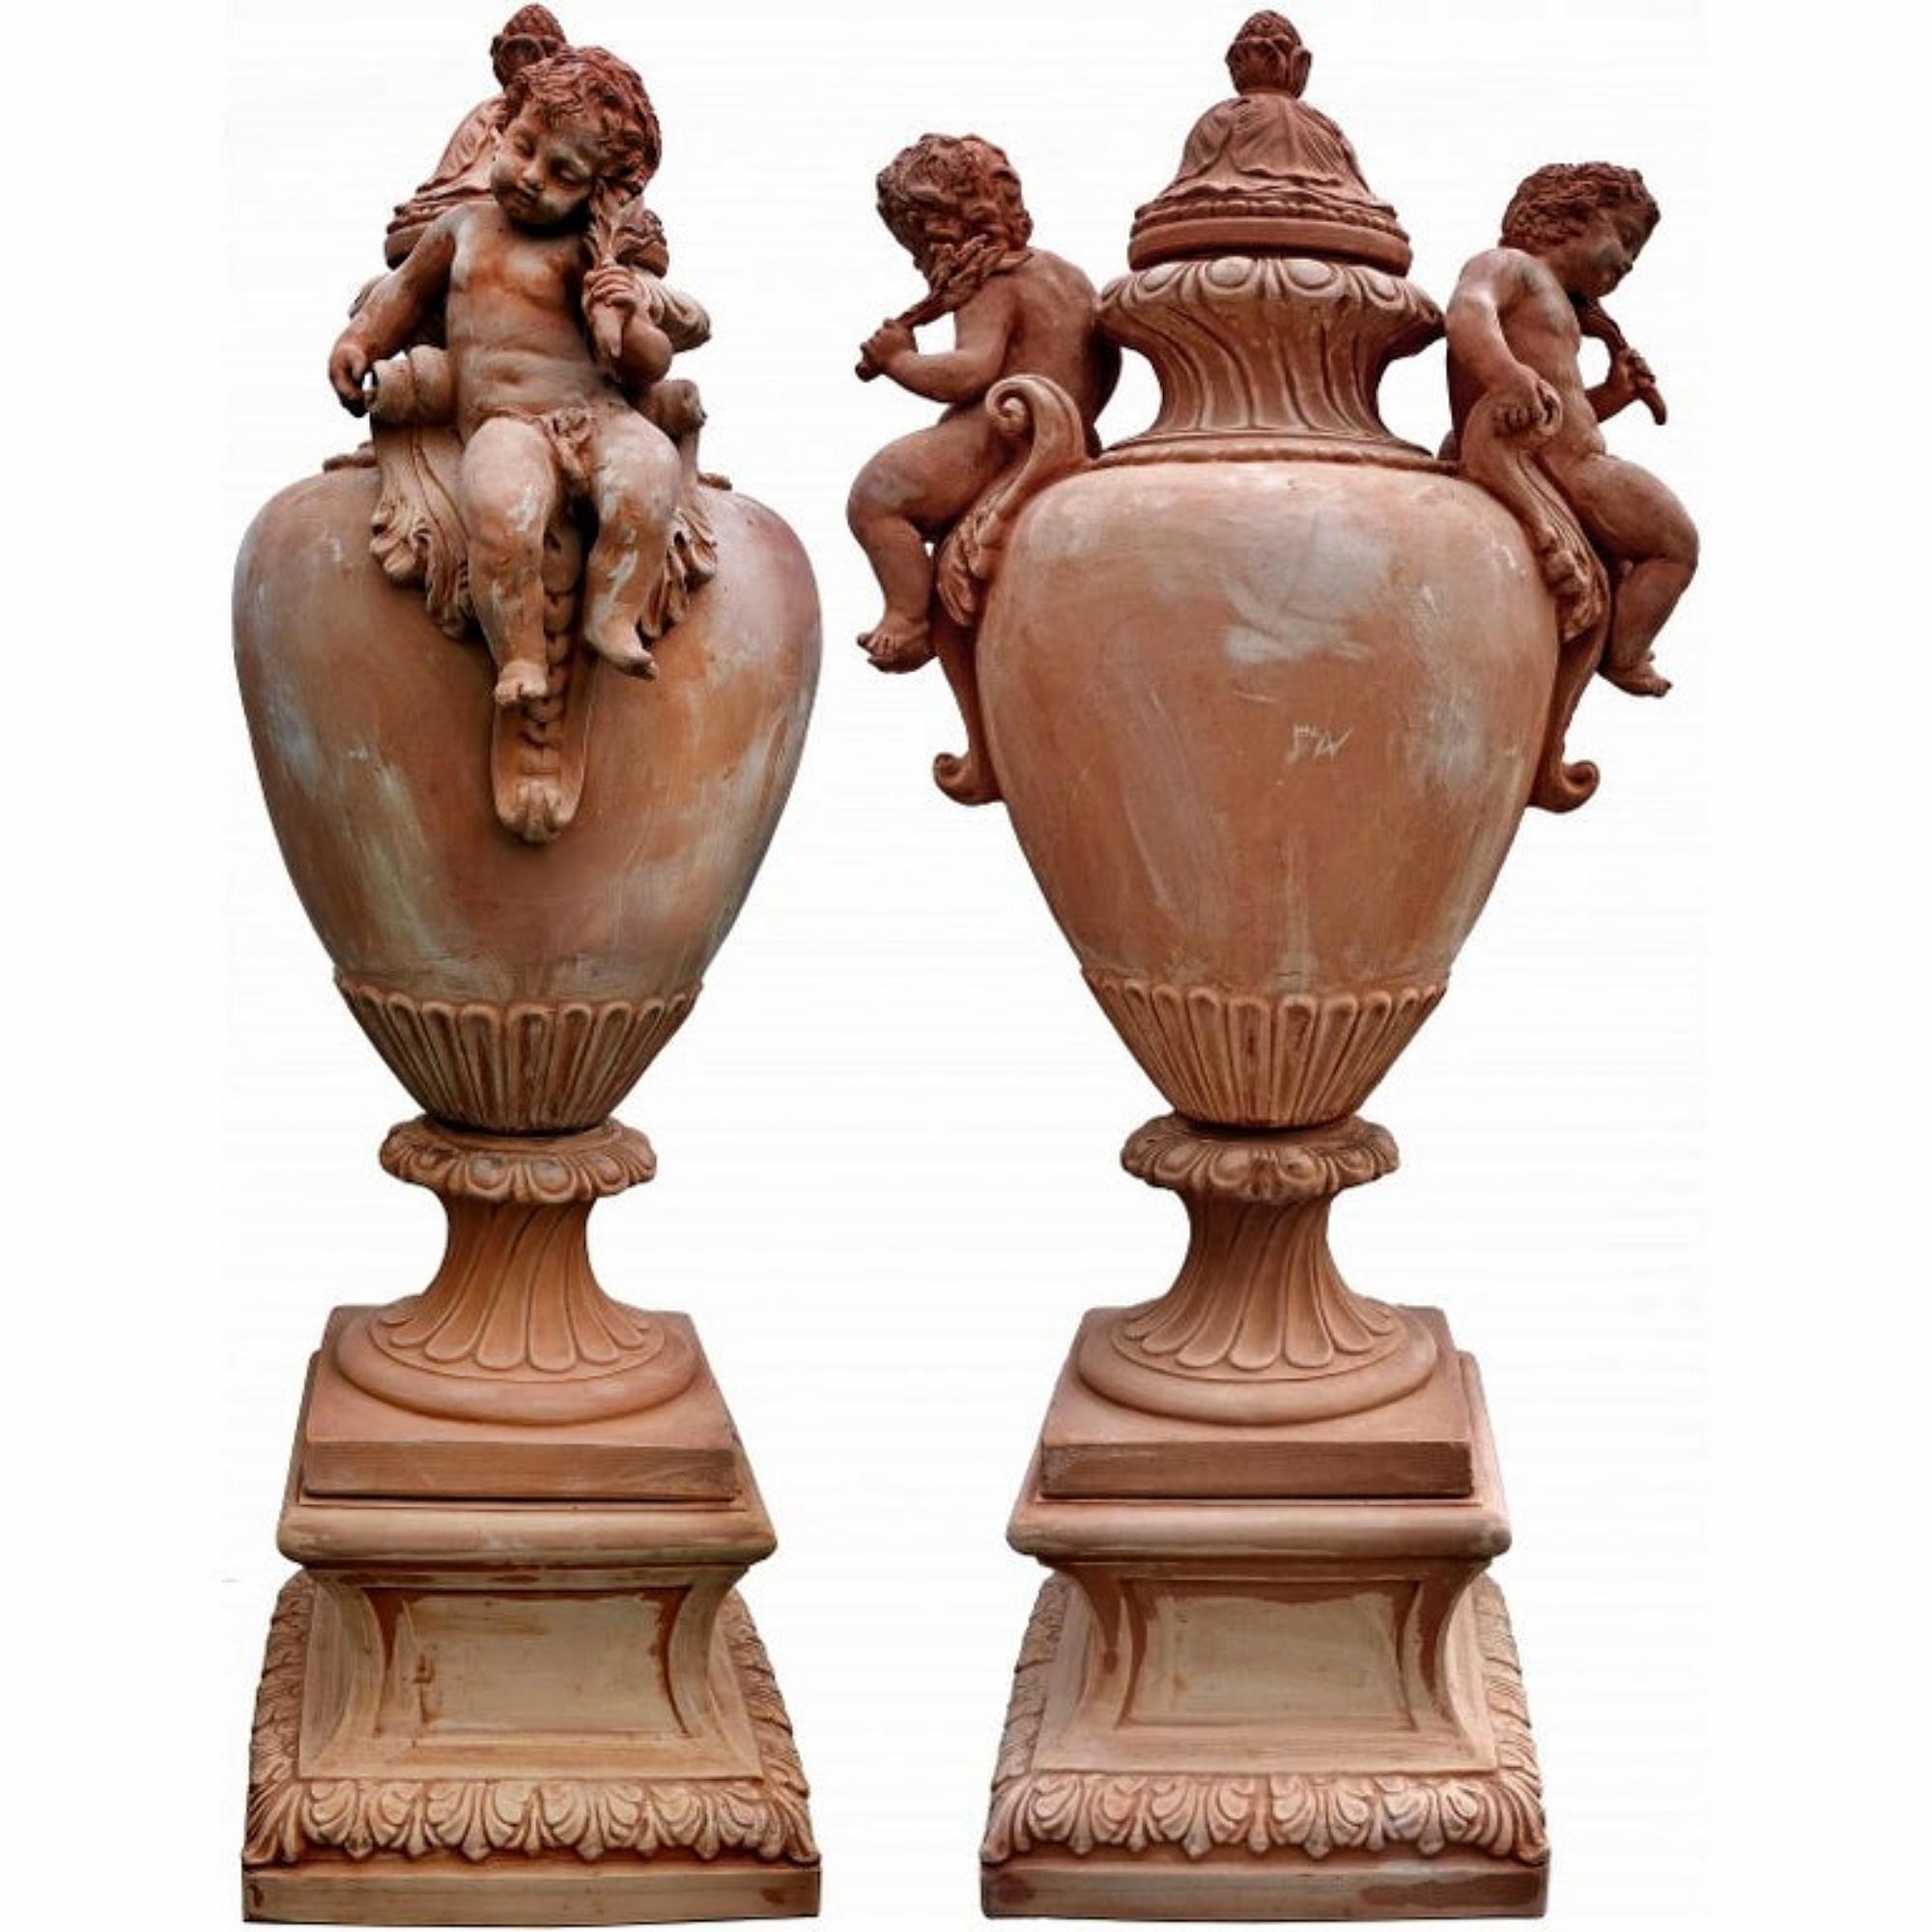 Huge baroque vases with putti - terracotta del L'Impruneta late 19th / 20th century.

Large baroque vases with bases for a maximum height (including the bases) of 154 cm.
The two putti are beautiful, finished to perfection. This jar has two